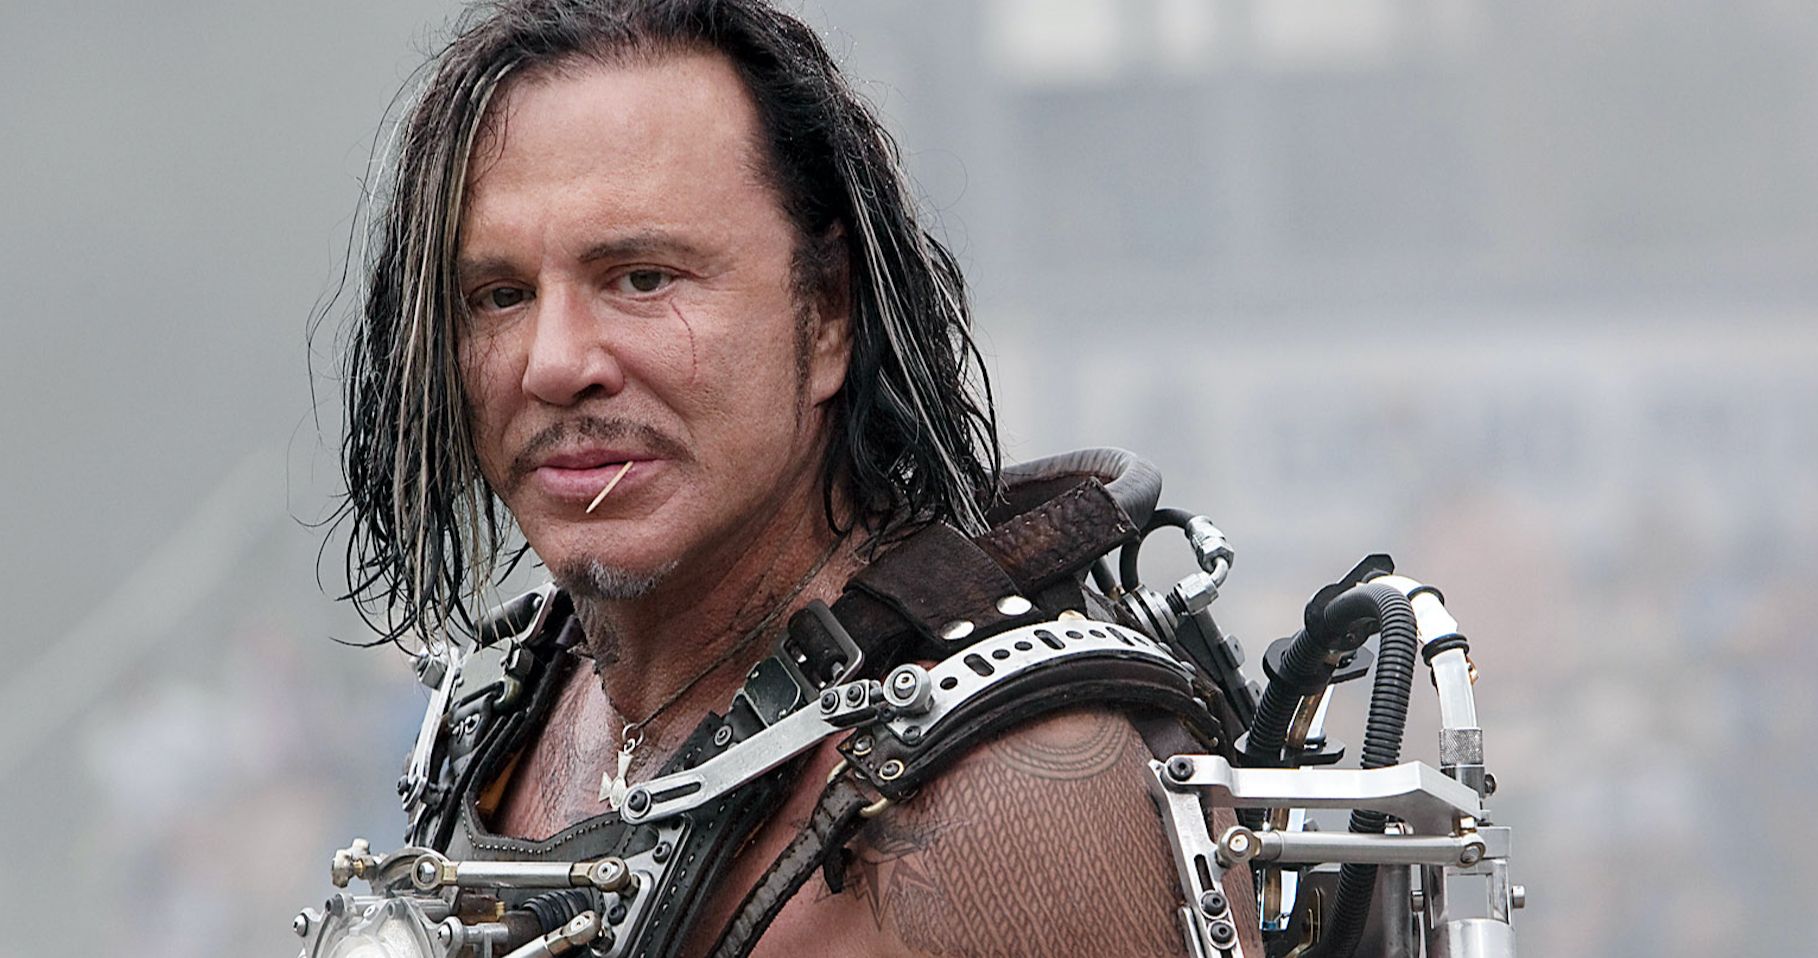 Marvel Movies Are 'Crap' According to Iron Man 2 Star Mickey Rourke